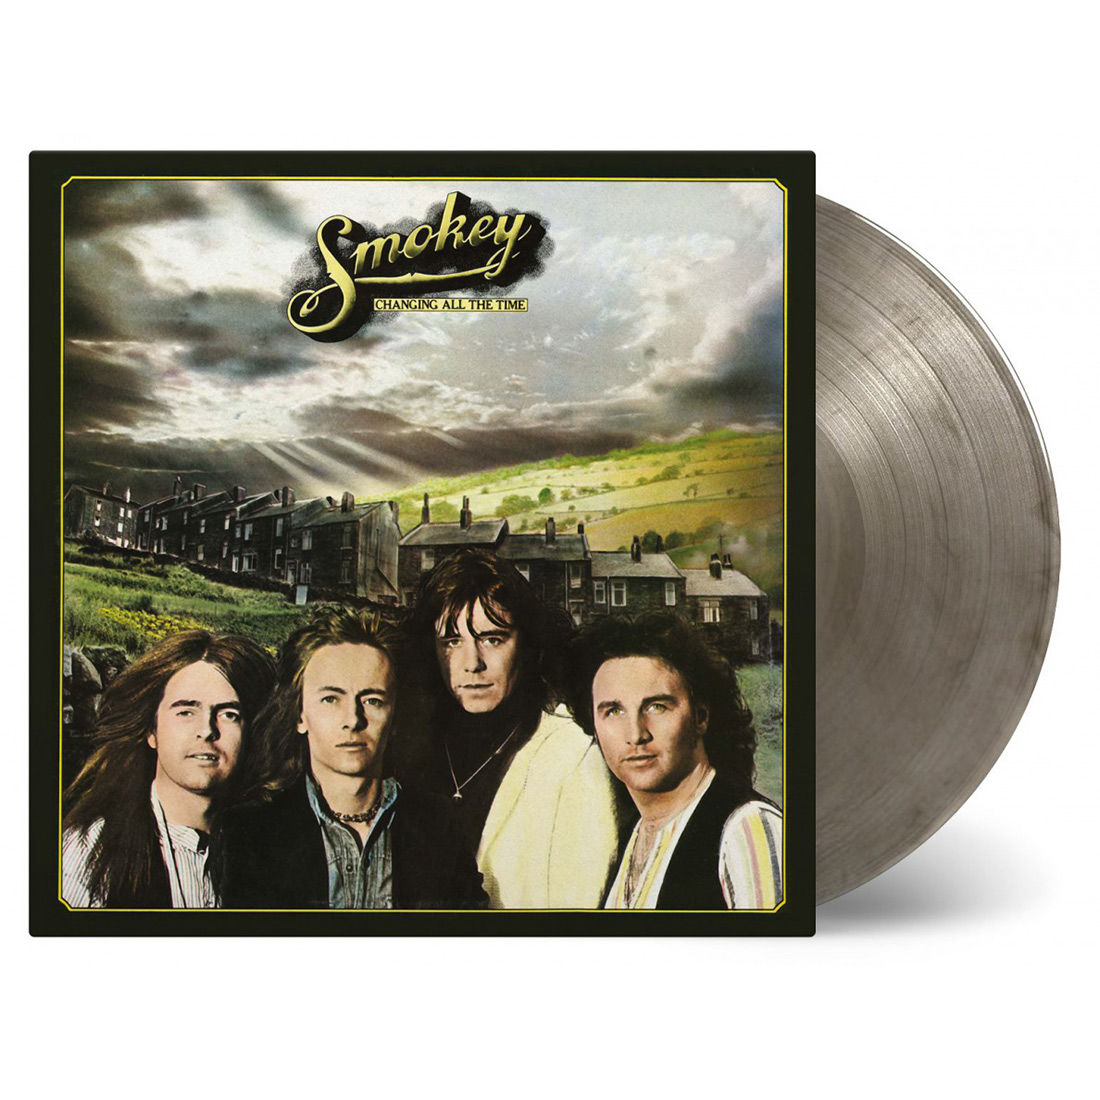 Changing All The Time (Expanded Edition): Limited Smoke Coloured Vinyl 2LP